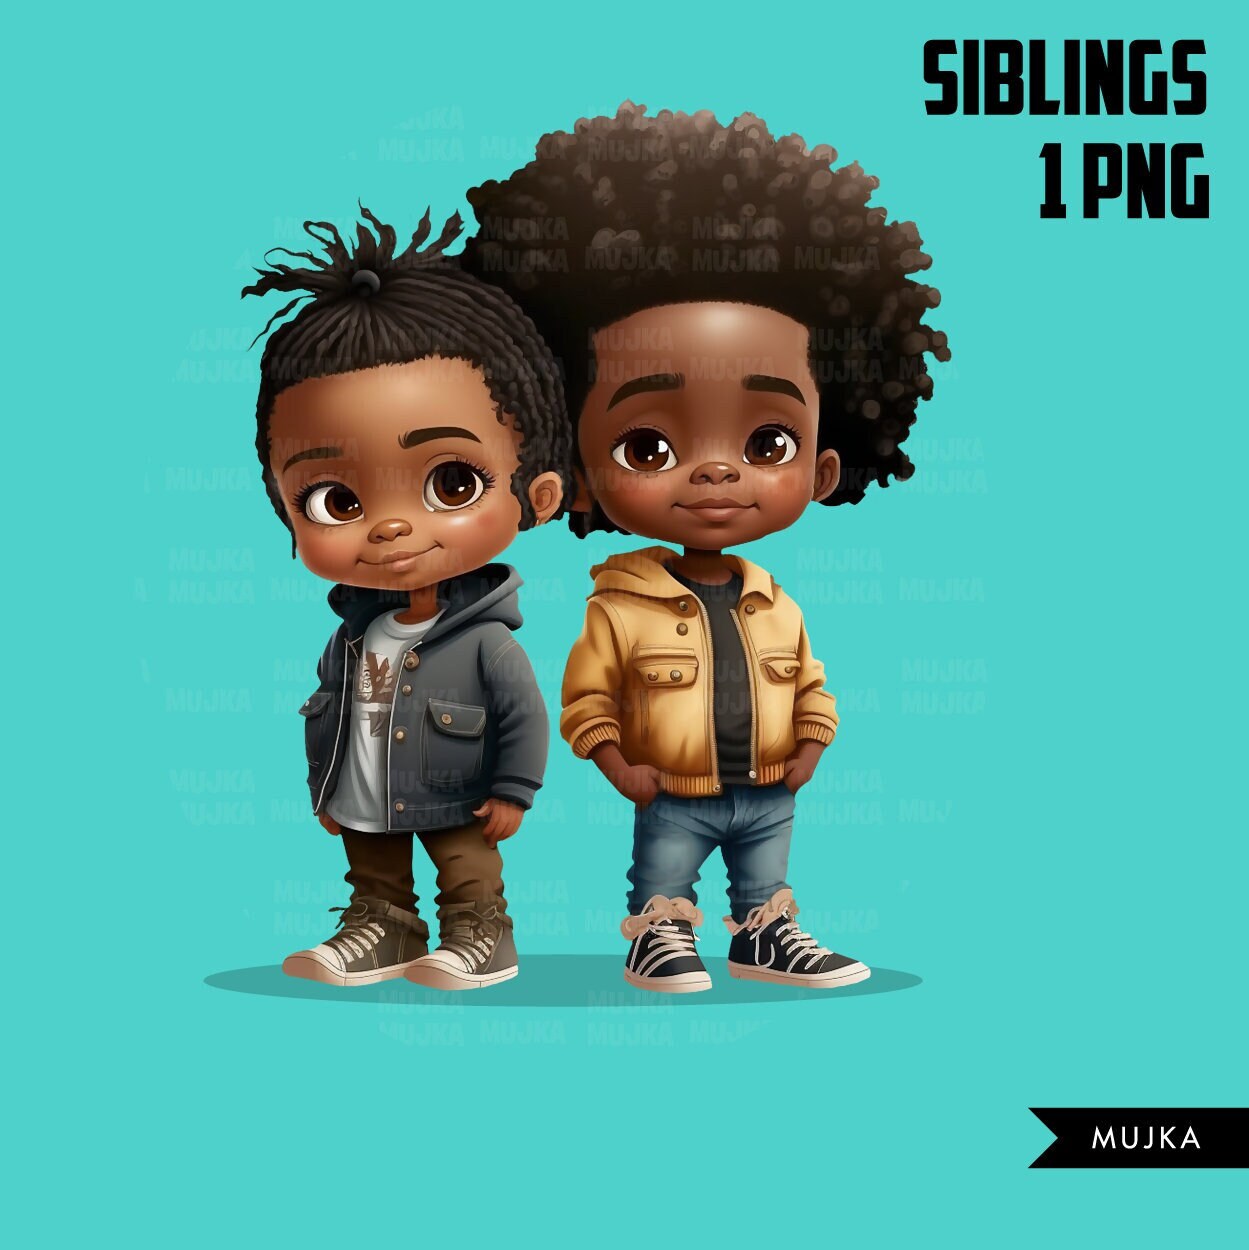 Black boys art, siblings png, friends png, family png, black boys clipart, valentine boys, black boy joy, twins png, black boy with dreads